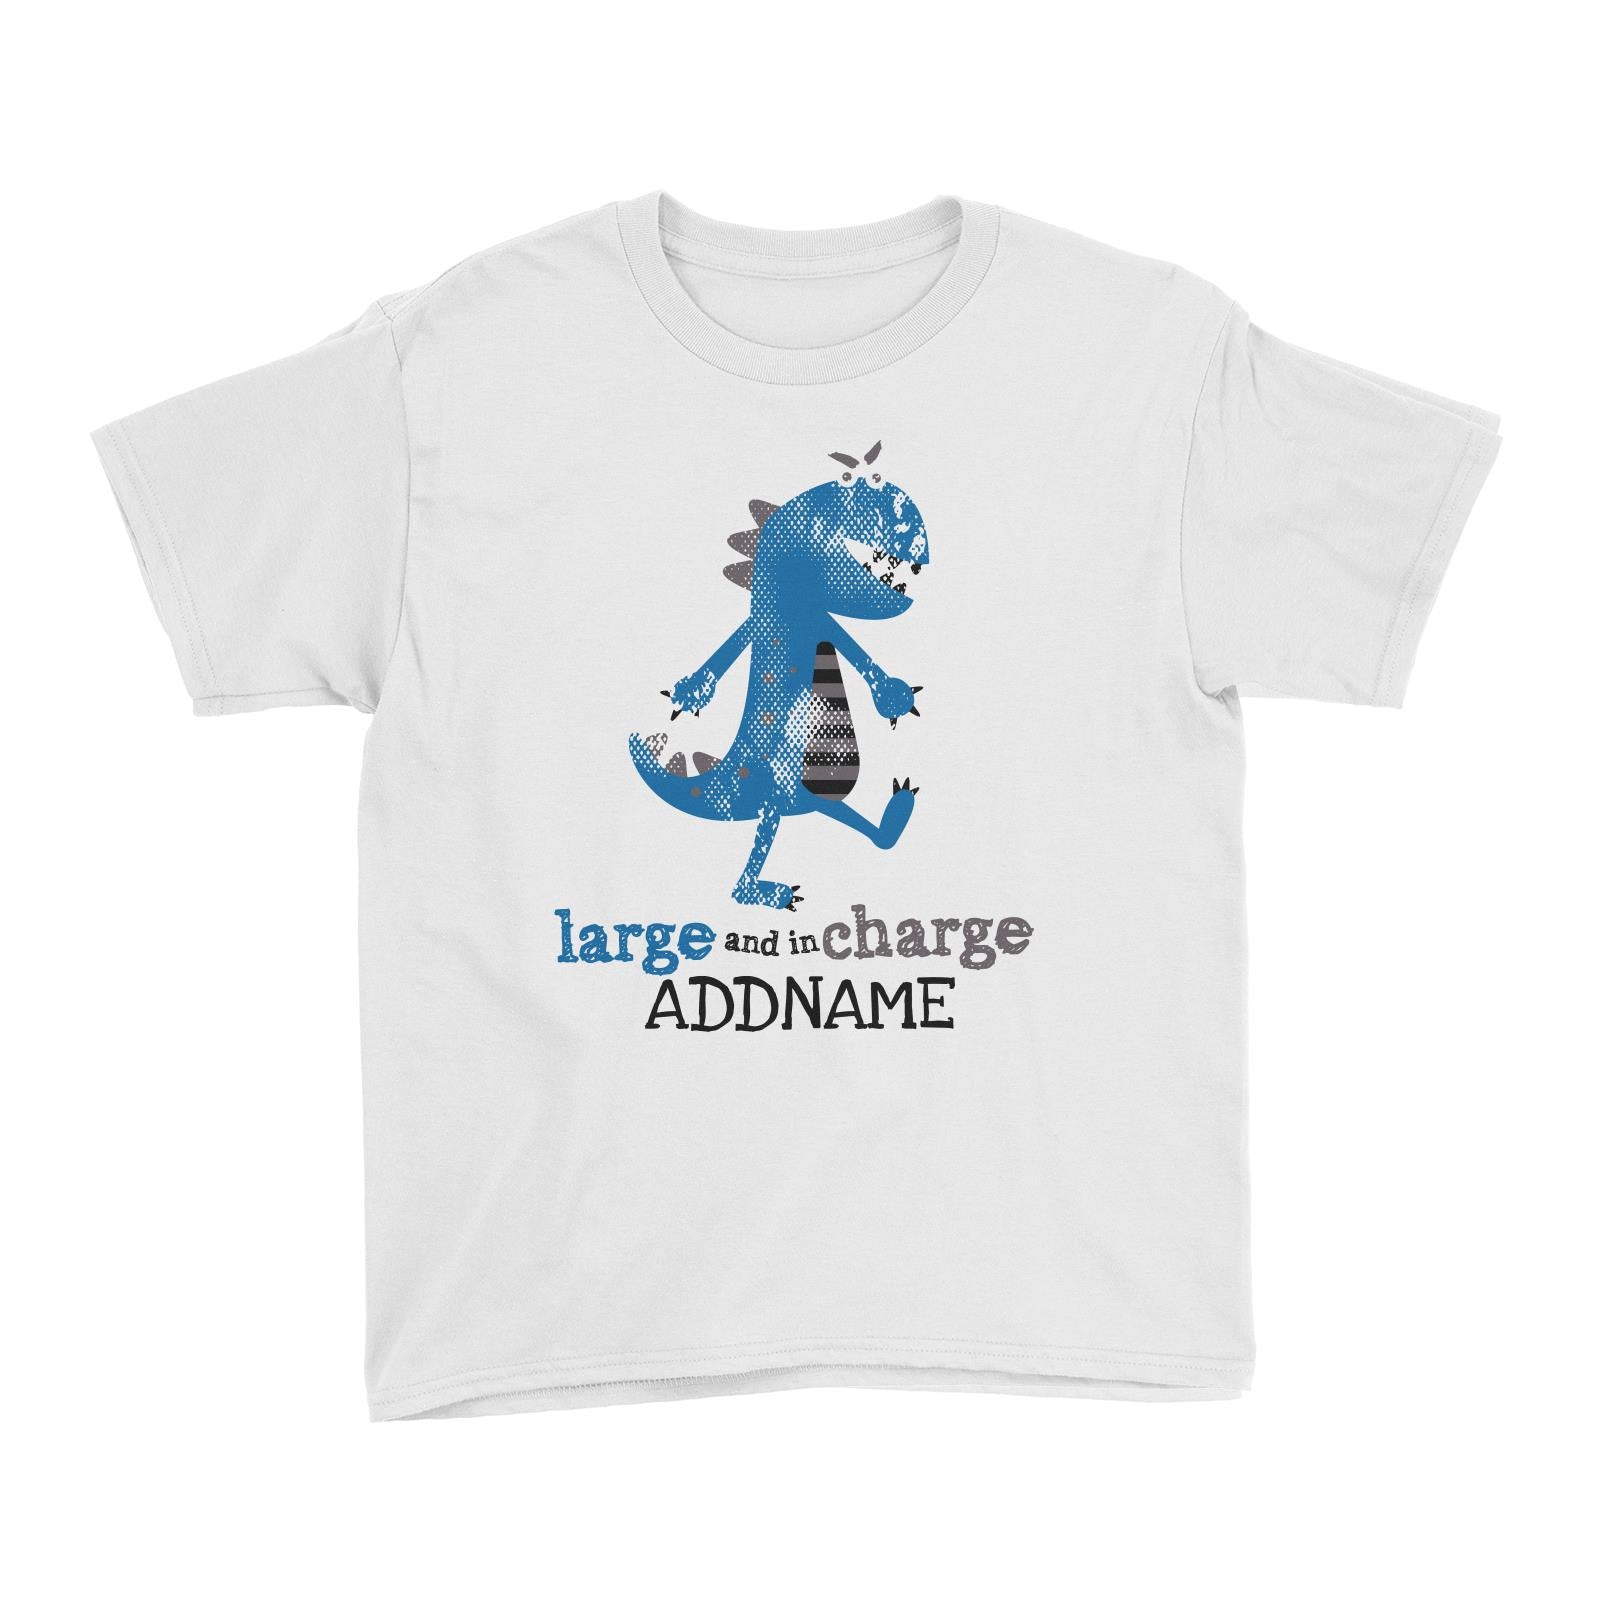 Large and In Charge Dinosaur Addname White Kid's T-Shirt